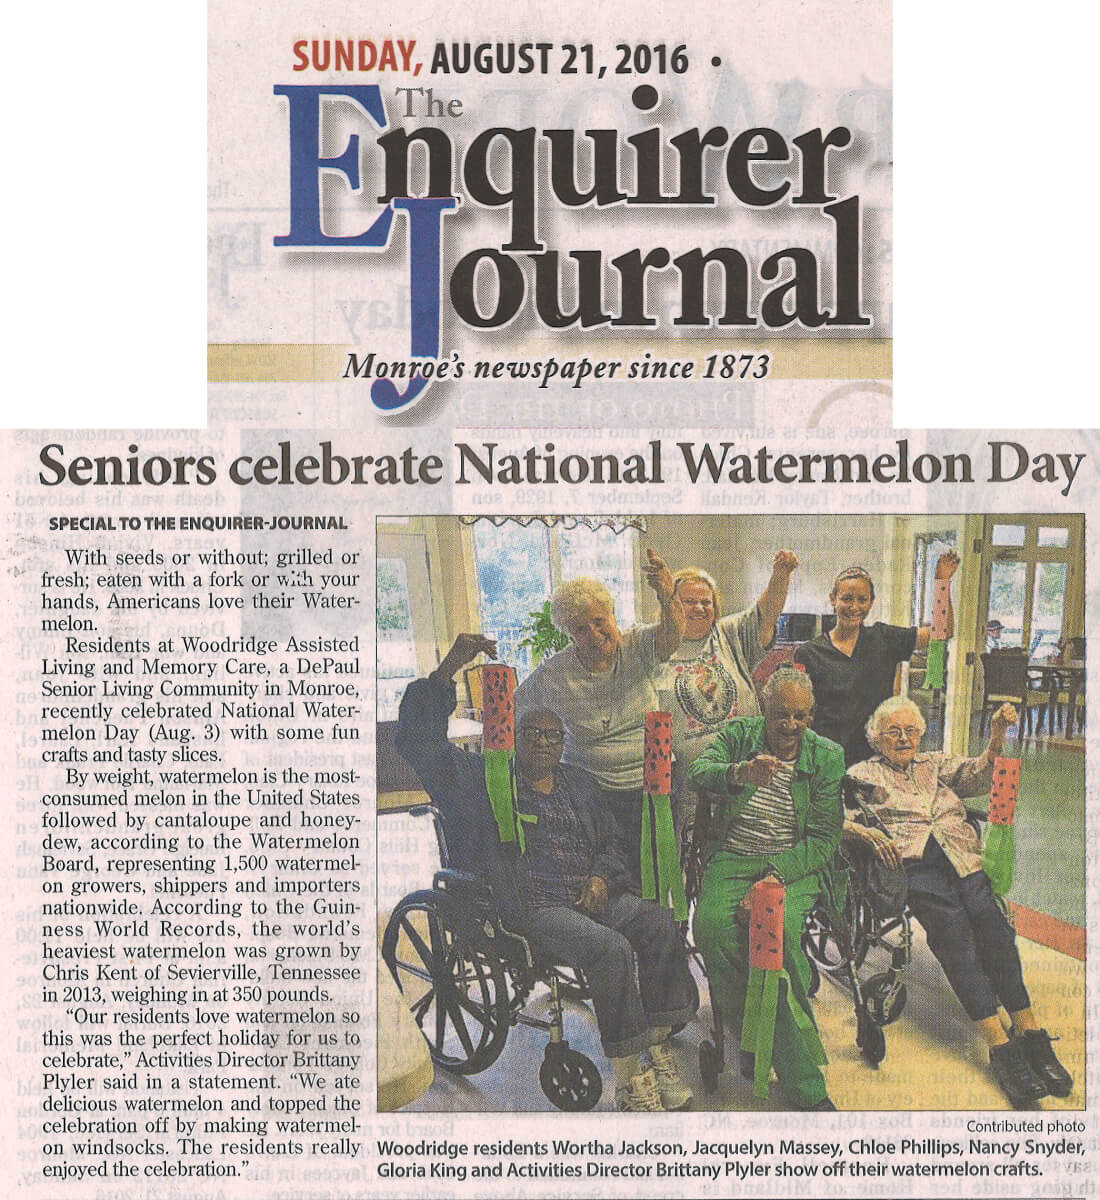 Woodridge Assisted Living residents celebrate national watermelon day, August 21, 2016 story in the Enquirer Journal 